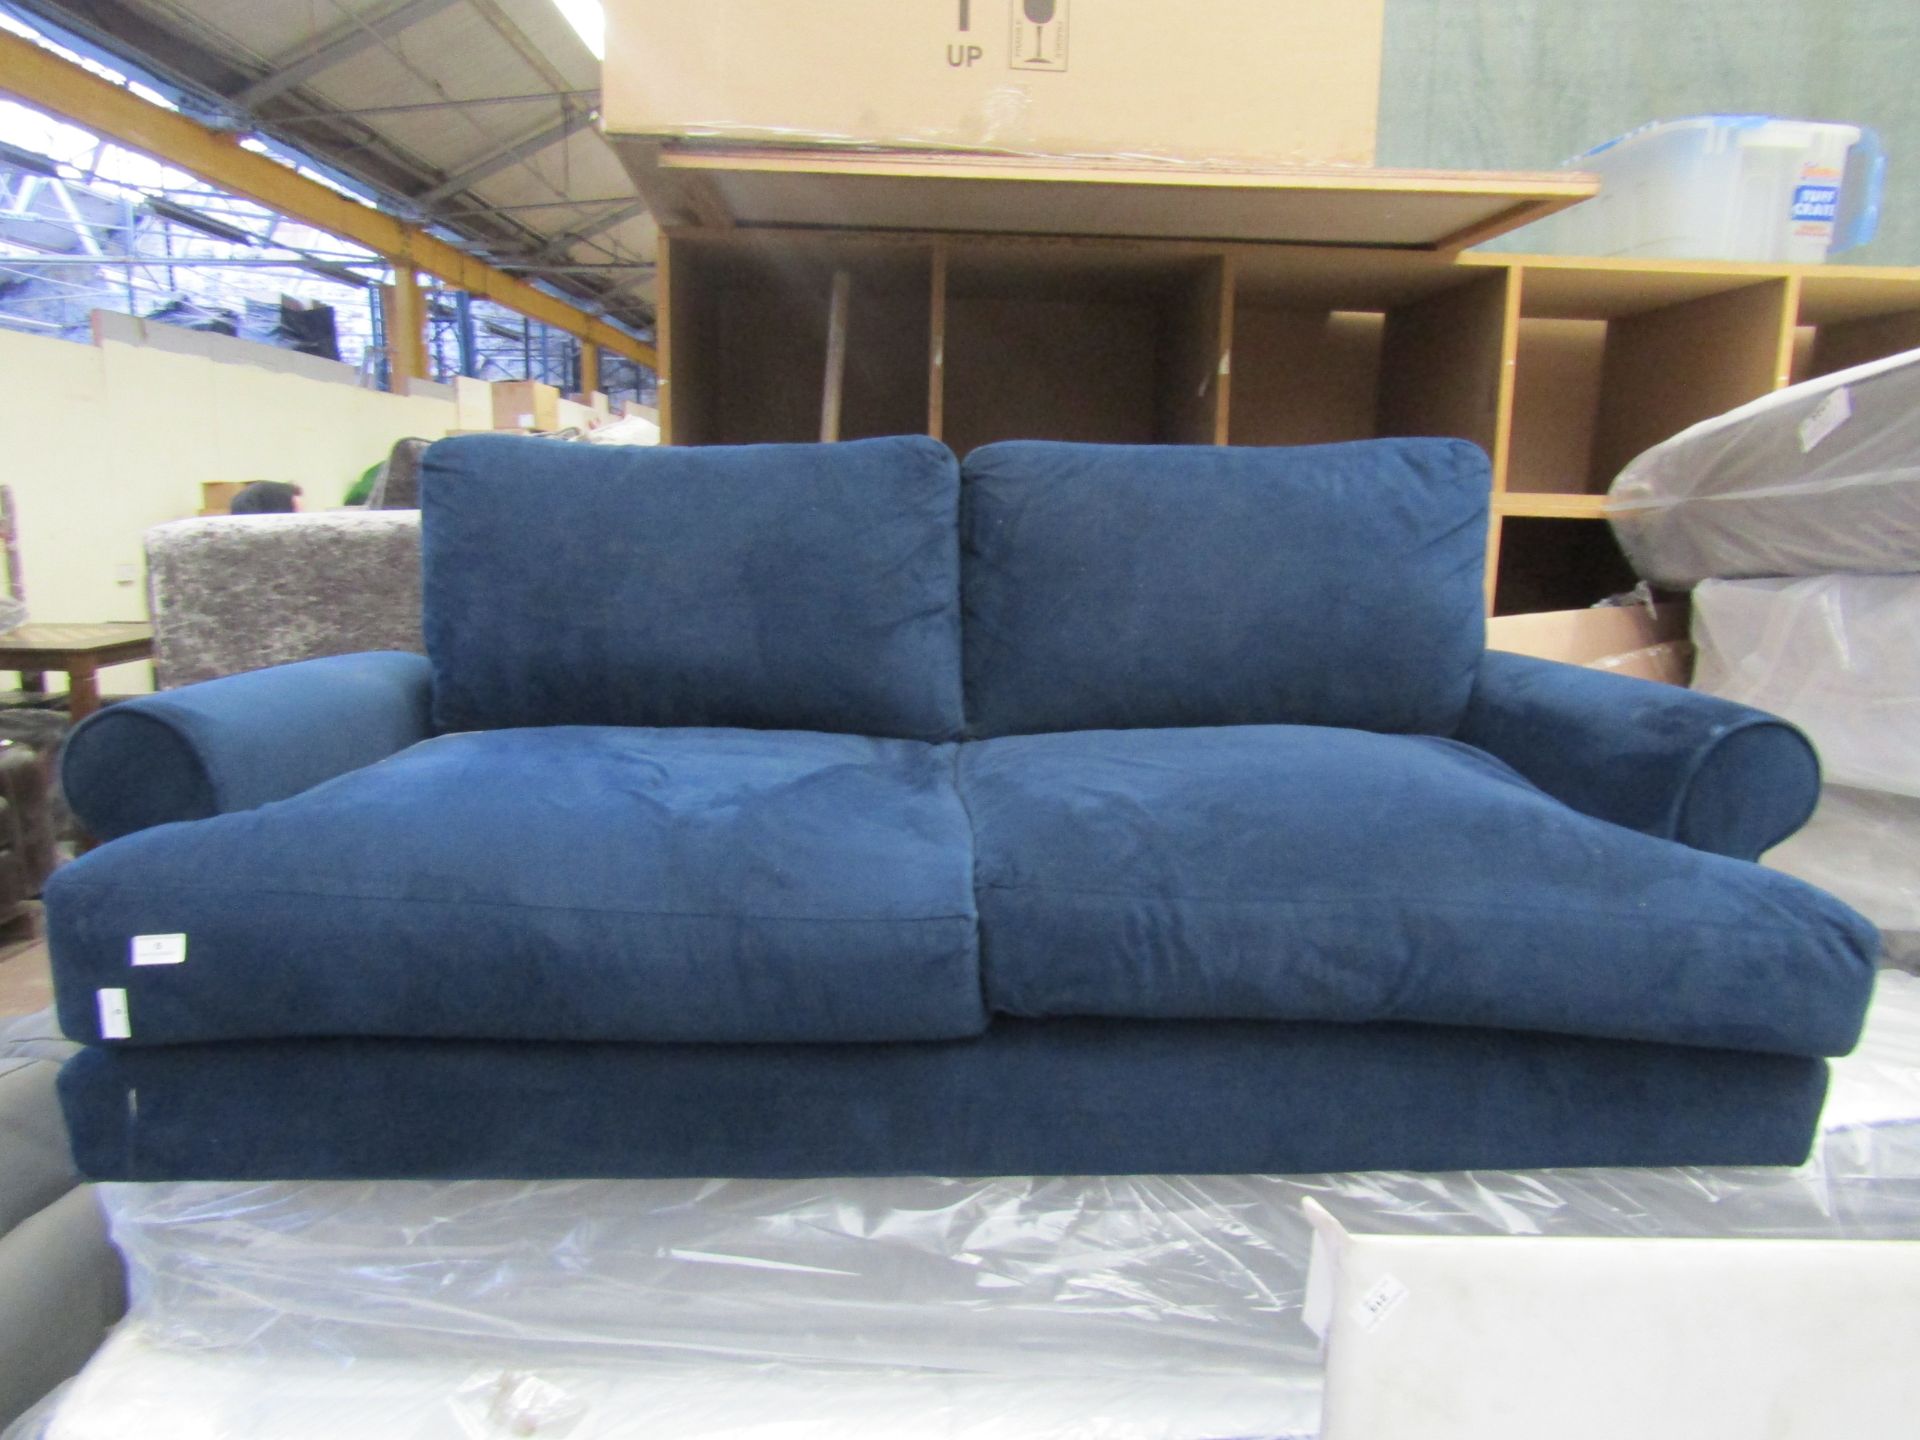 | 1X | SWOON 2 SEATER SOFA | HAS A RIP ON THE BACK CORNER AND IS MISSING LEGS | RRP CIRCA 700 |